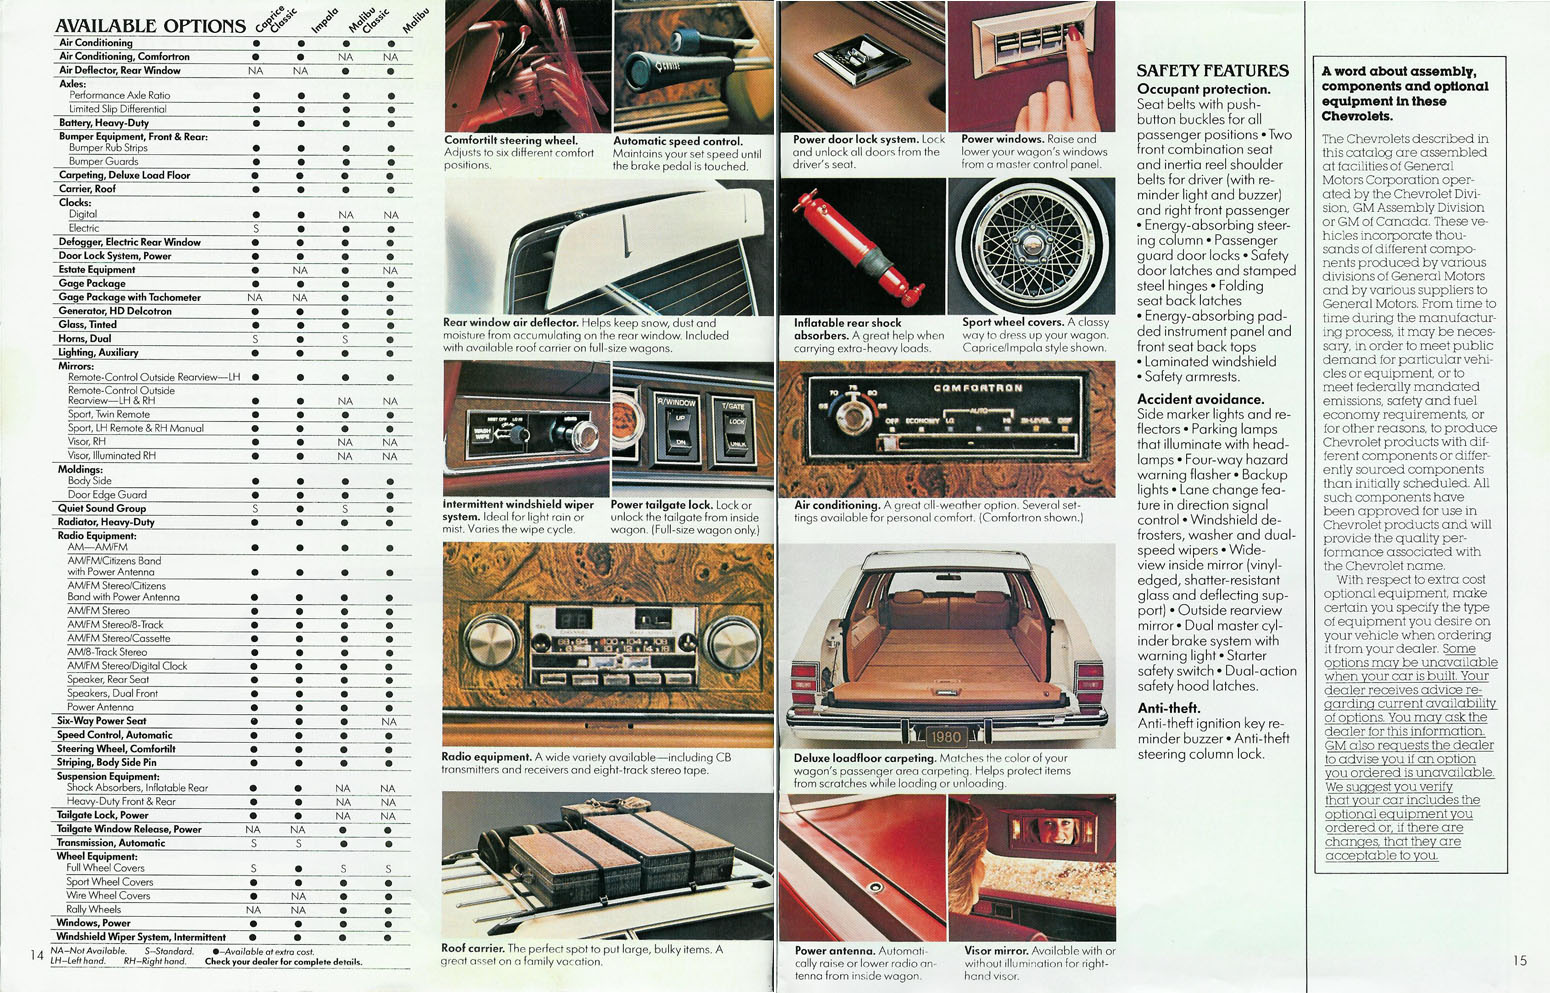 1980 Chevrolet Wagons Brochure Page 8